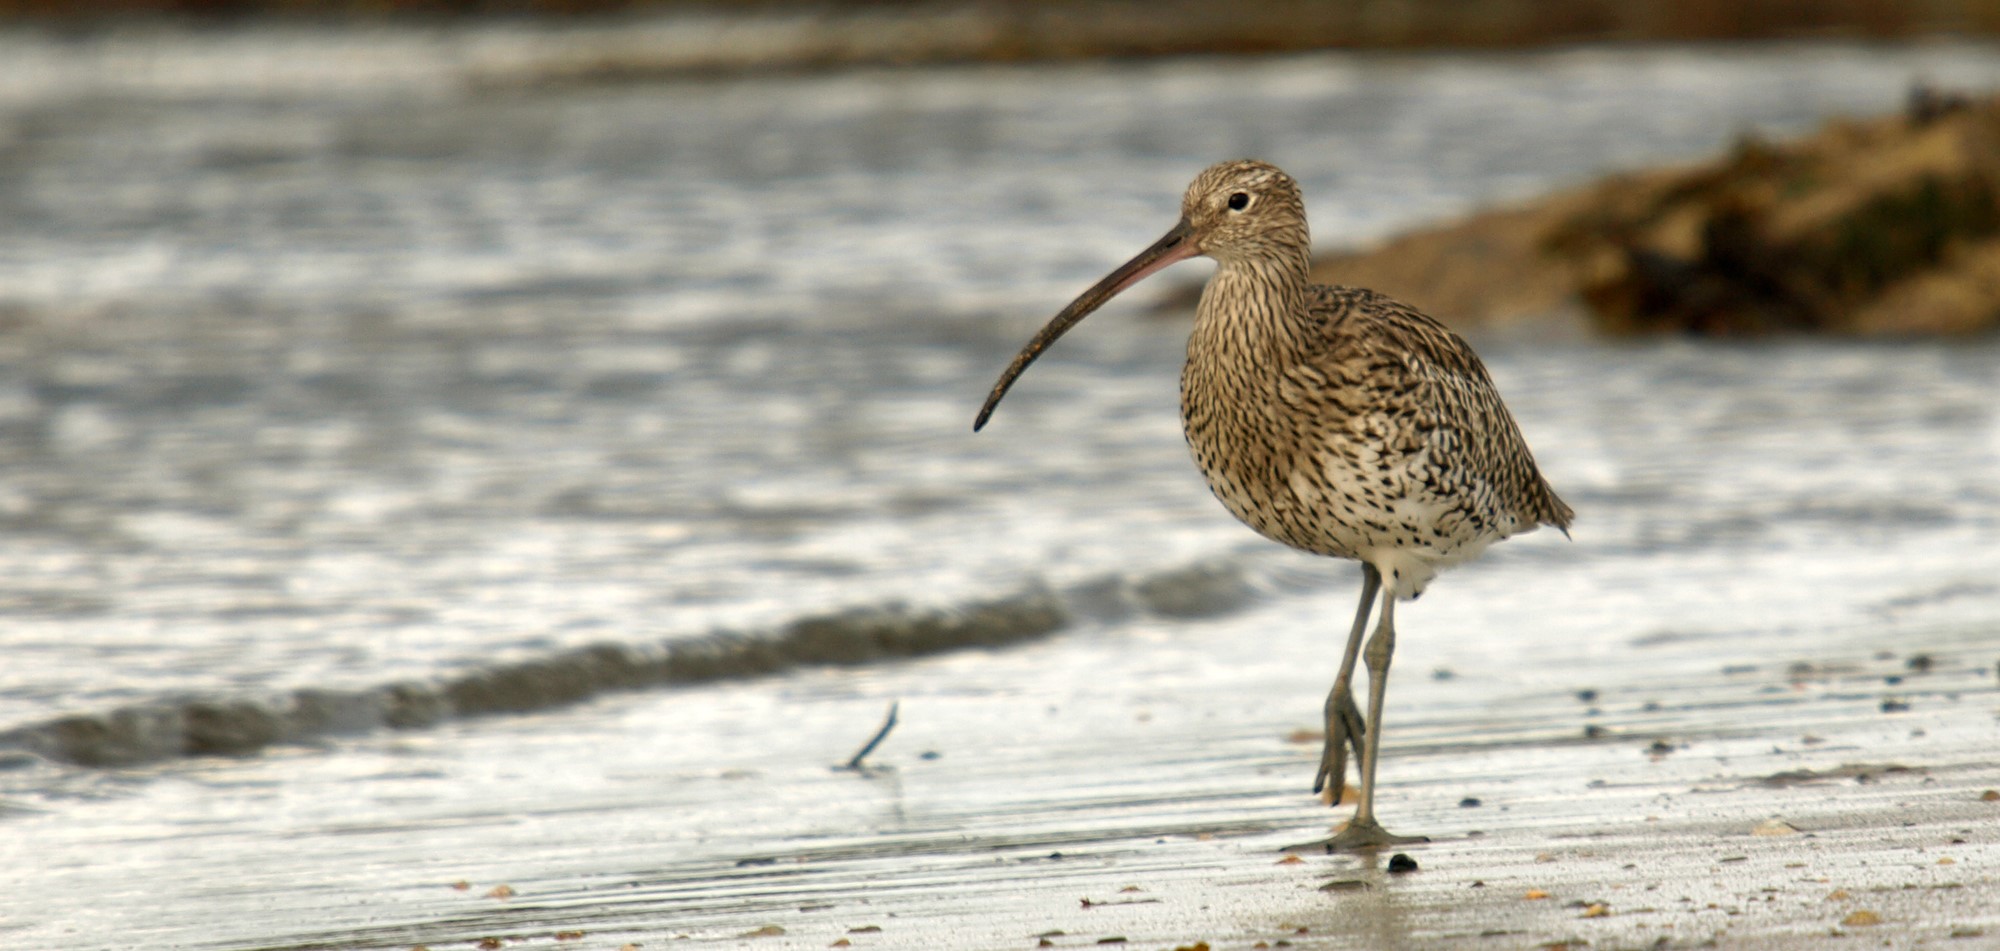 The curlew, Europe’s largest wading bird with its distinctive long curved bill, is commonly found feeding on tidal mudflats, saltmarshes and nearby farmland in winter. It was added to the Red list on the UK Conservation Status Report in 2015.